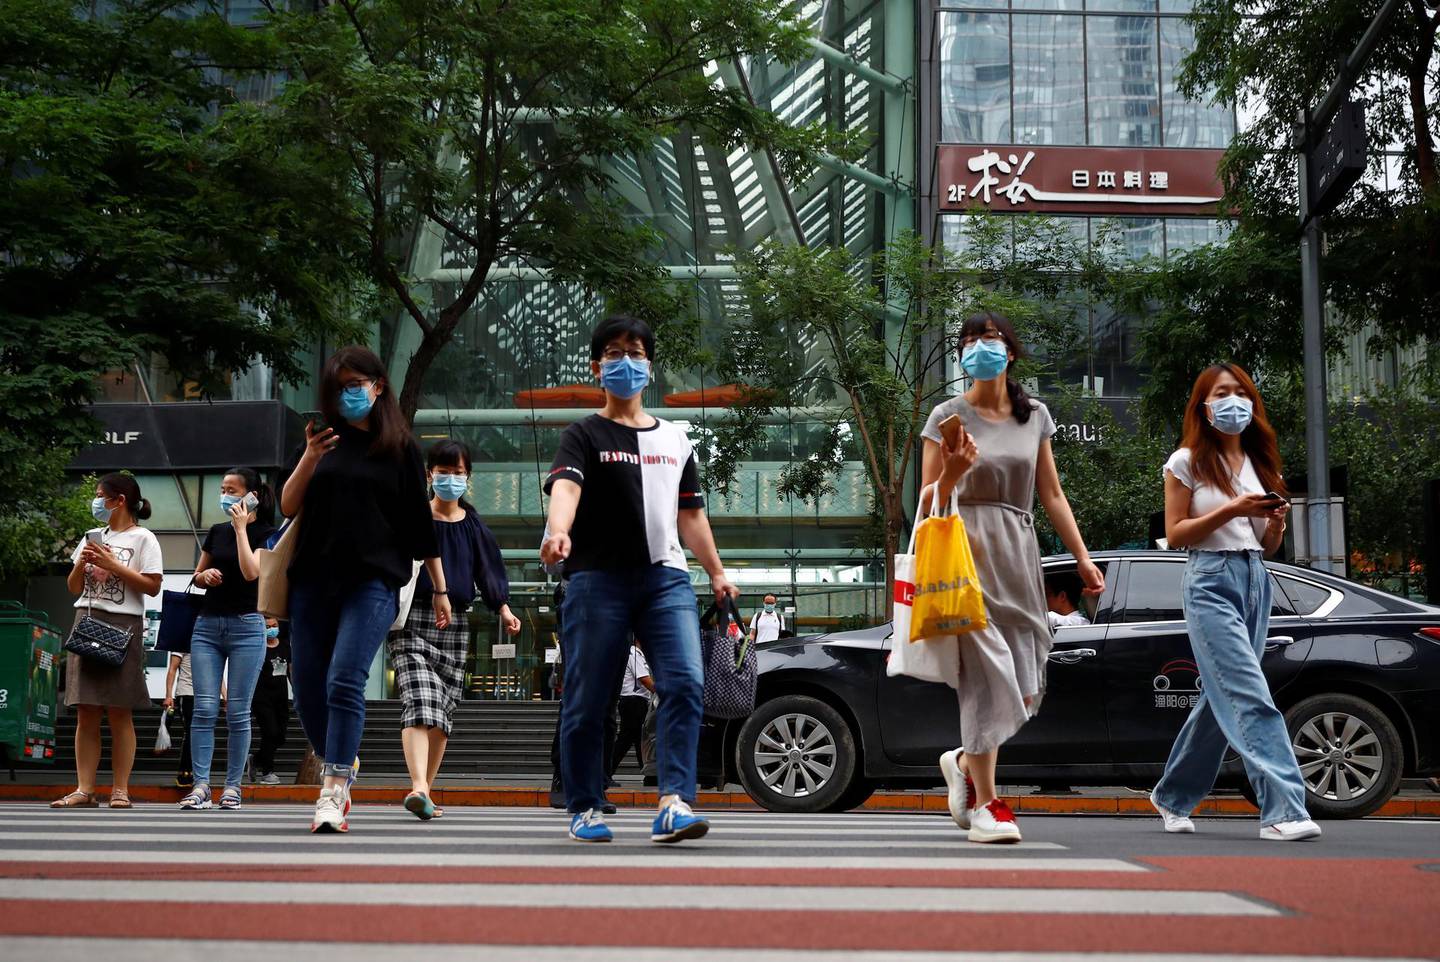 People wearing face masks leave an office building after work following a new outbreak of the coronavirus disease (COVID-19) in Beijing, China, June 29, 2020. REUTERS/Thomas Peter